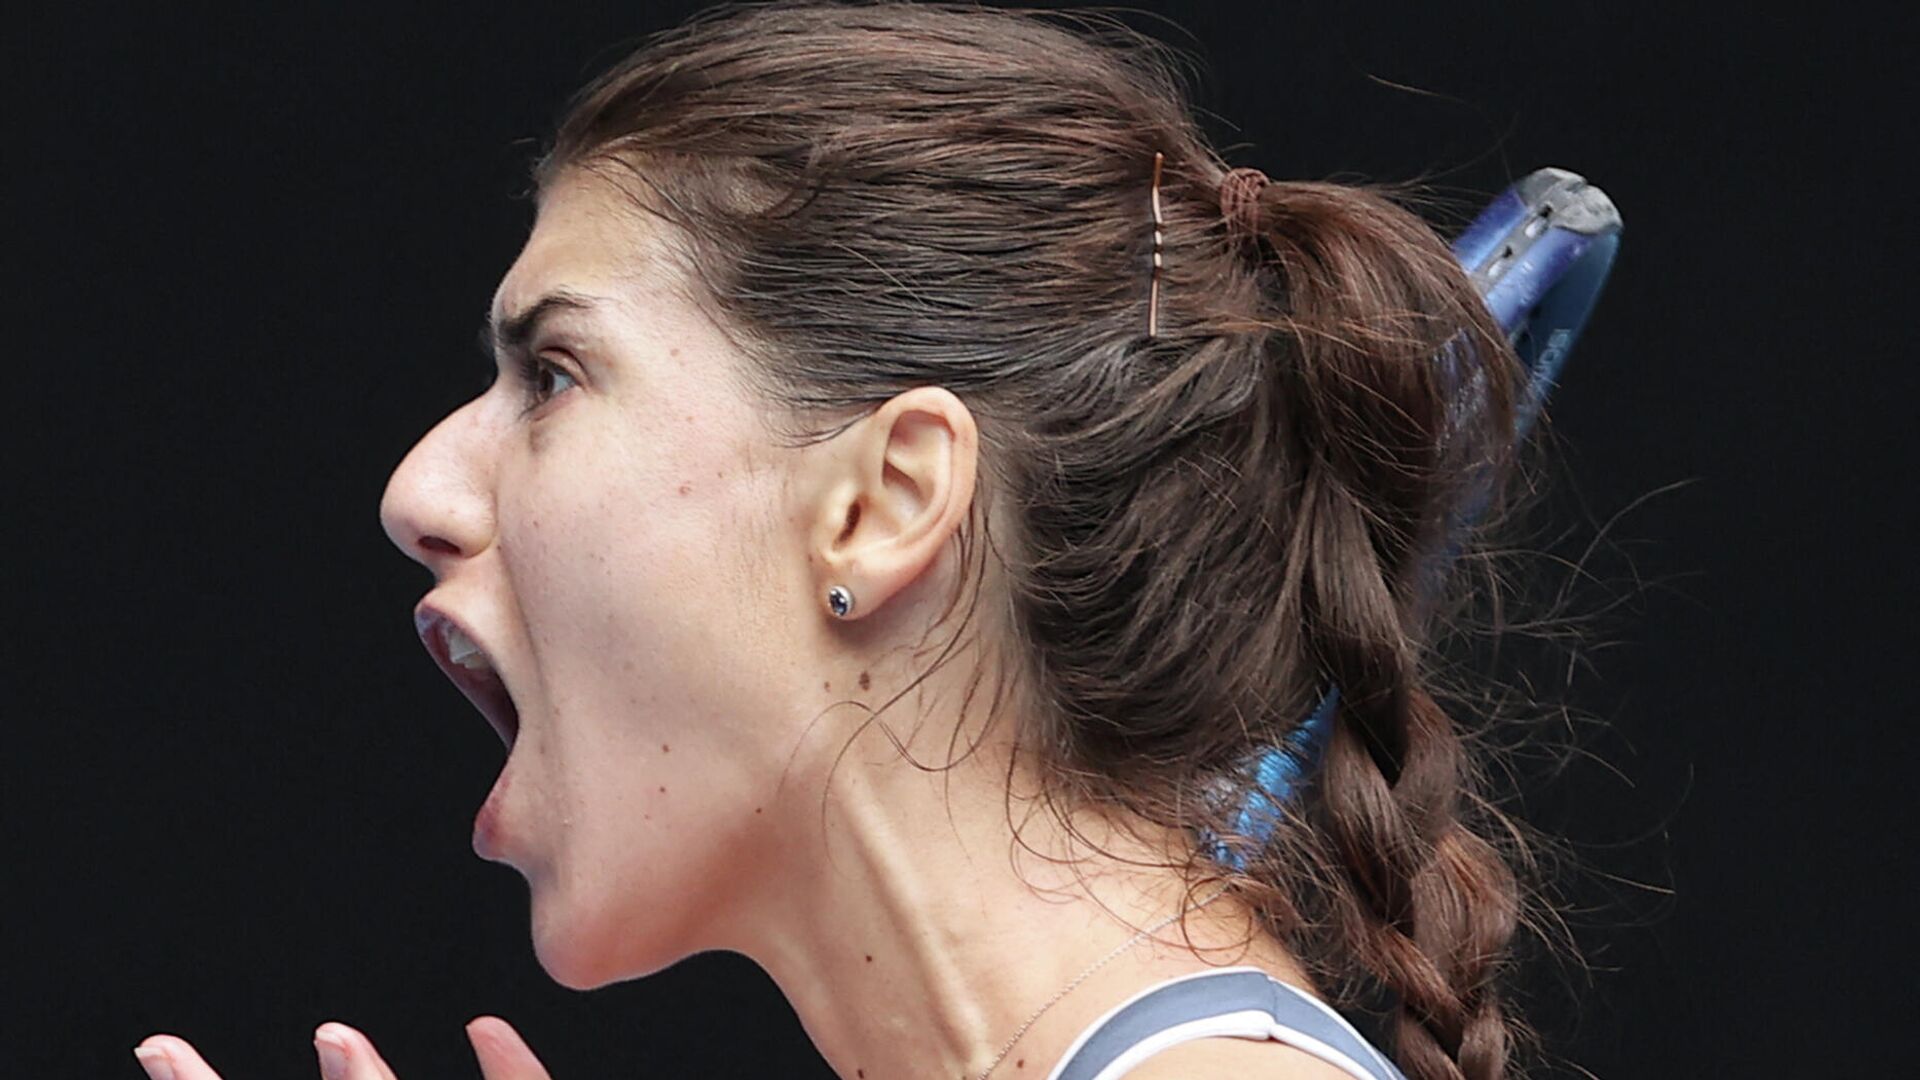 Romania's Sorana Cirstea reacts as she plays against Czech Republic's Marketa Vondrousova during their women's singles match on day five of the Australian Open tennis tournament in Melbourne on February 12, 2021. (Photo by David Gray / AFP) / -- IMAGE RESTRICTED TO EDITORIAL USE - STRICTLY NO COMMERCIAL USE -- - РИА Новости, 1920, 28.05.2021